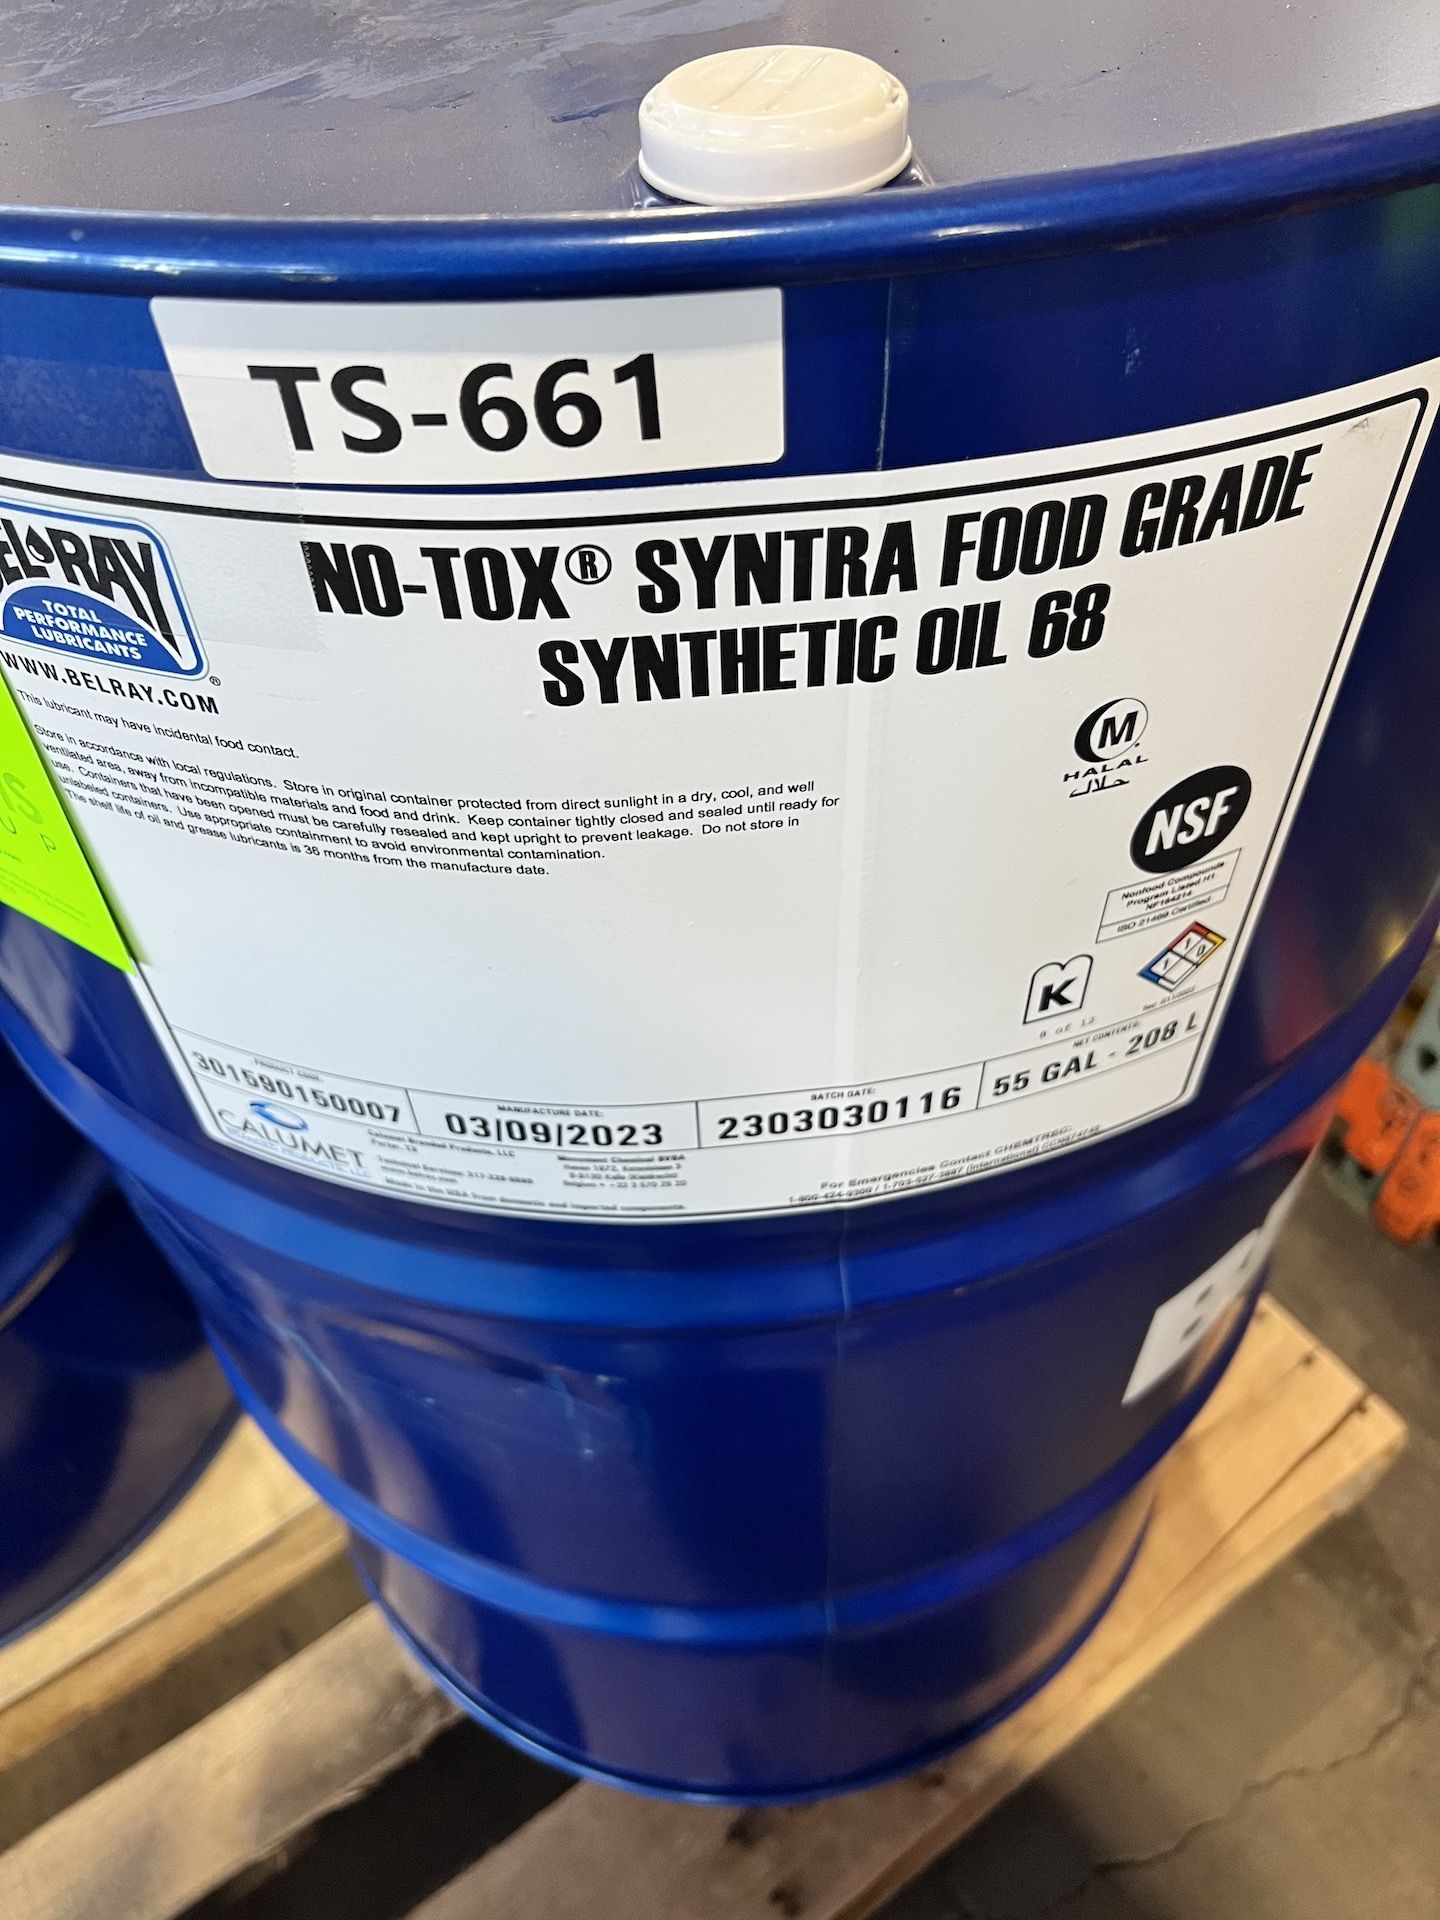 BELRAY 55-GALLON DRUM OF NO-TOX SYNTRA FOOD GRADE SYNTHETIC OIL 68 - Image 2 of 2